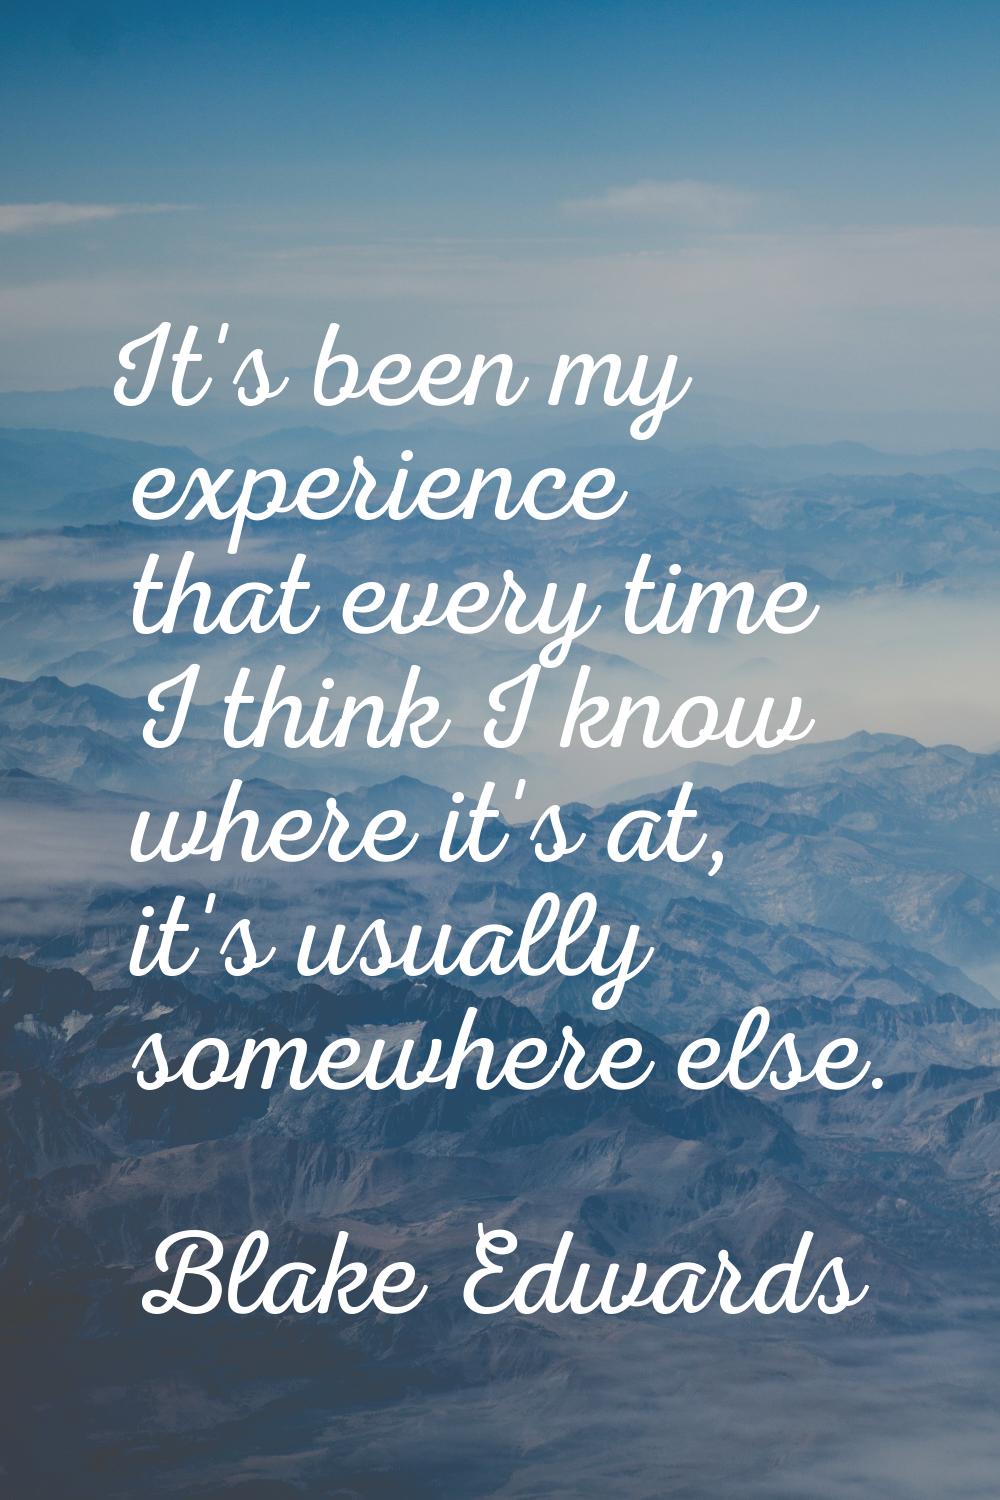 It's been my experience that every time I think I know where it's at, it's usually somewhere else.